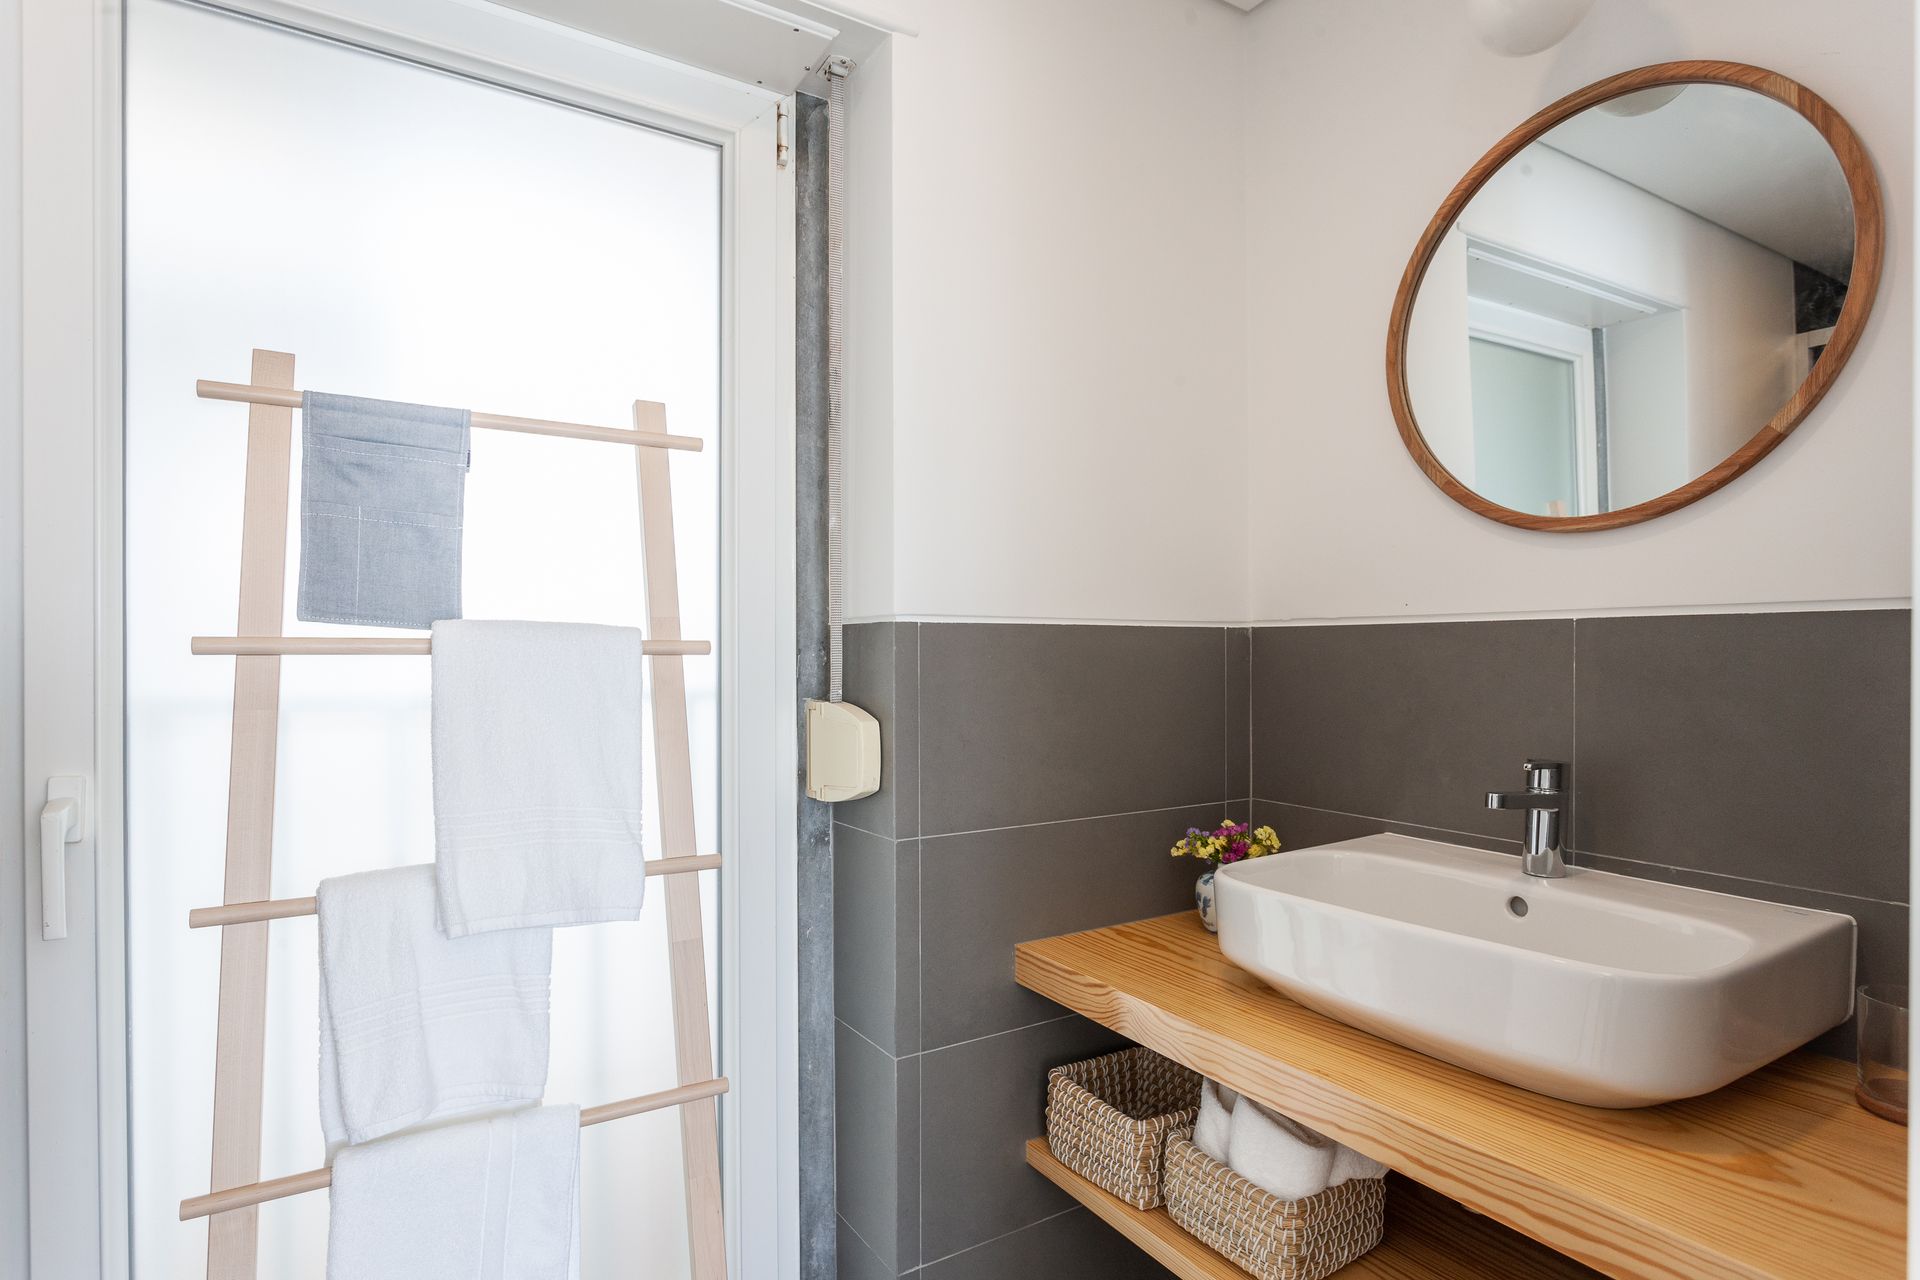 a bathroom with a sink , mirror and towel rack .